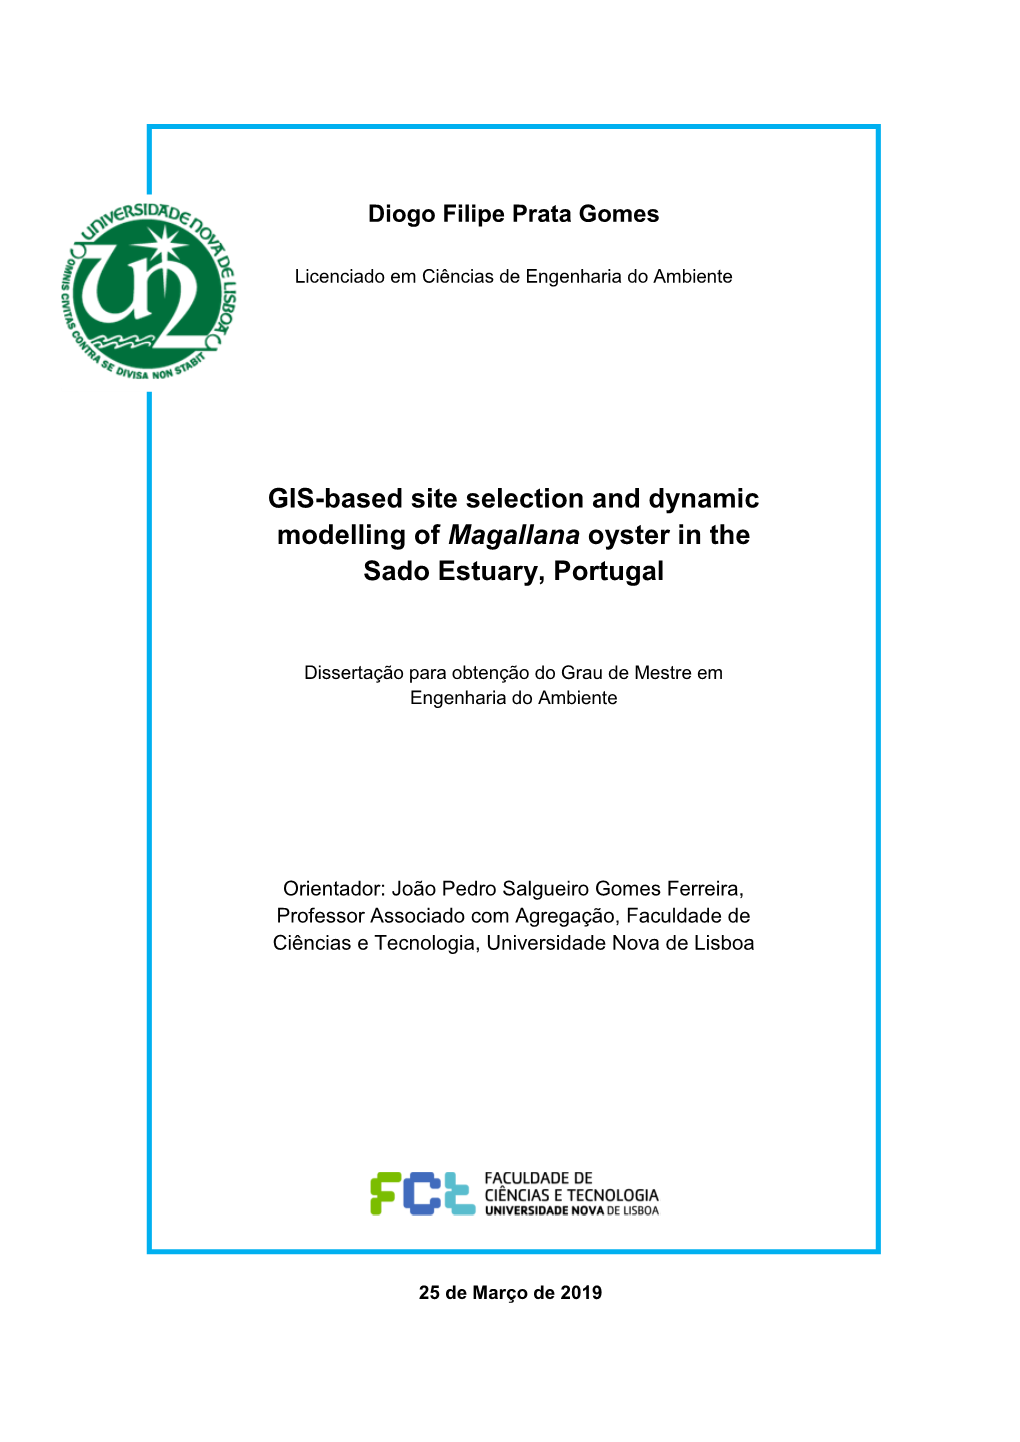 GIS-Based Site Selection and Dynamic Modelling of Magallana Oyster in the Sado Estuary, Portugal